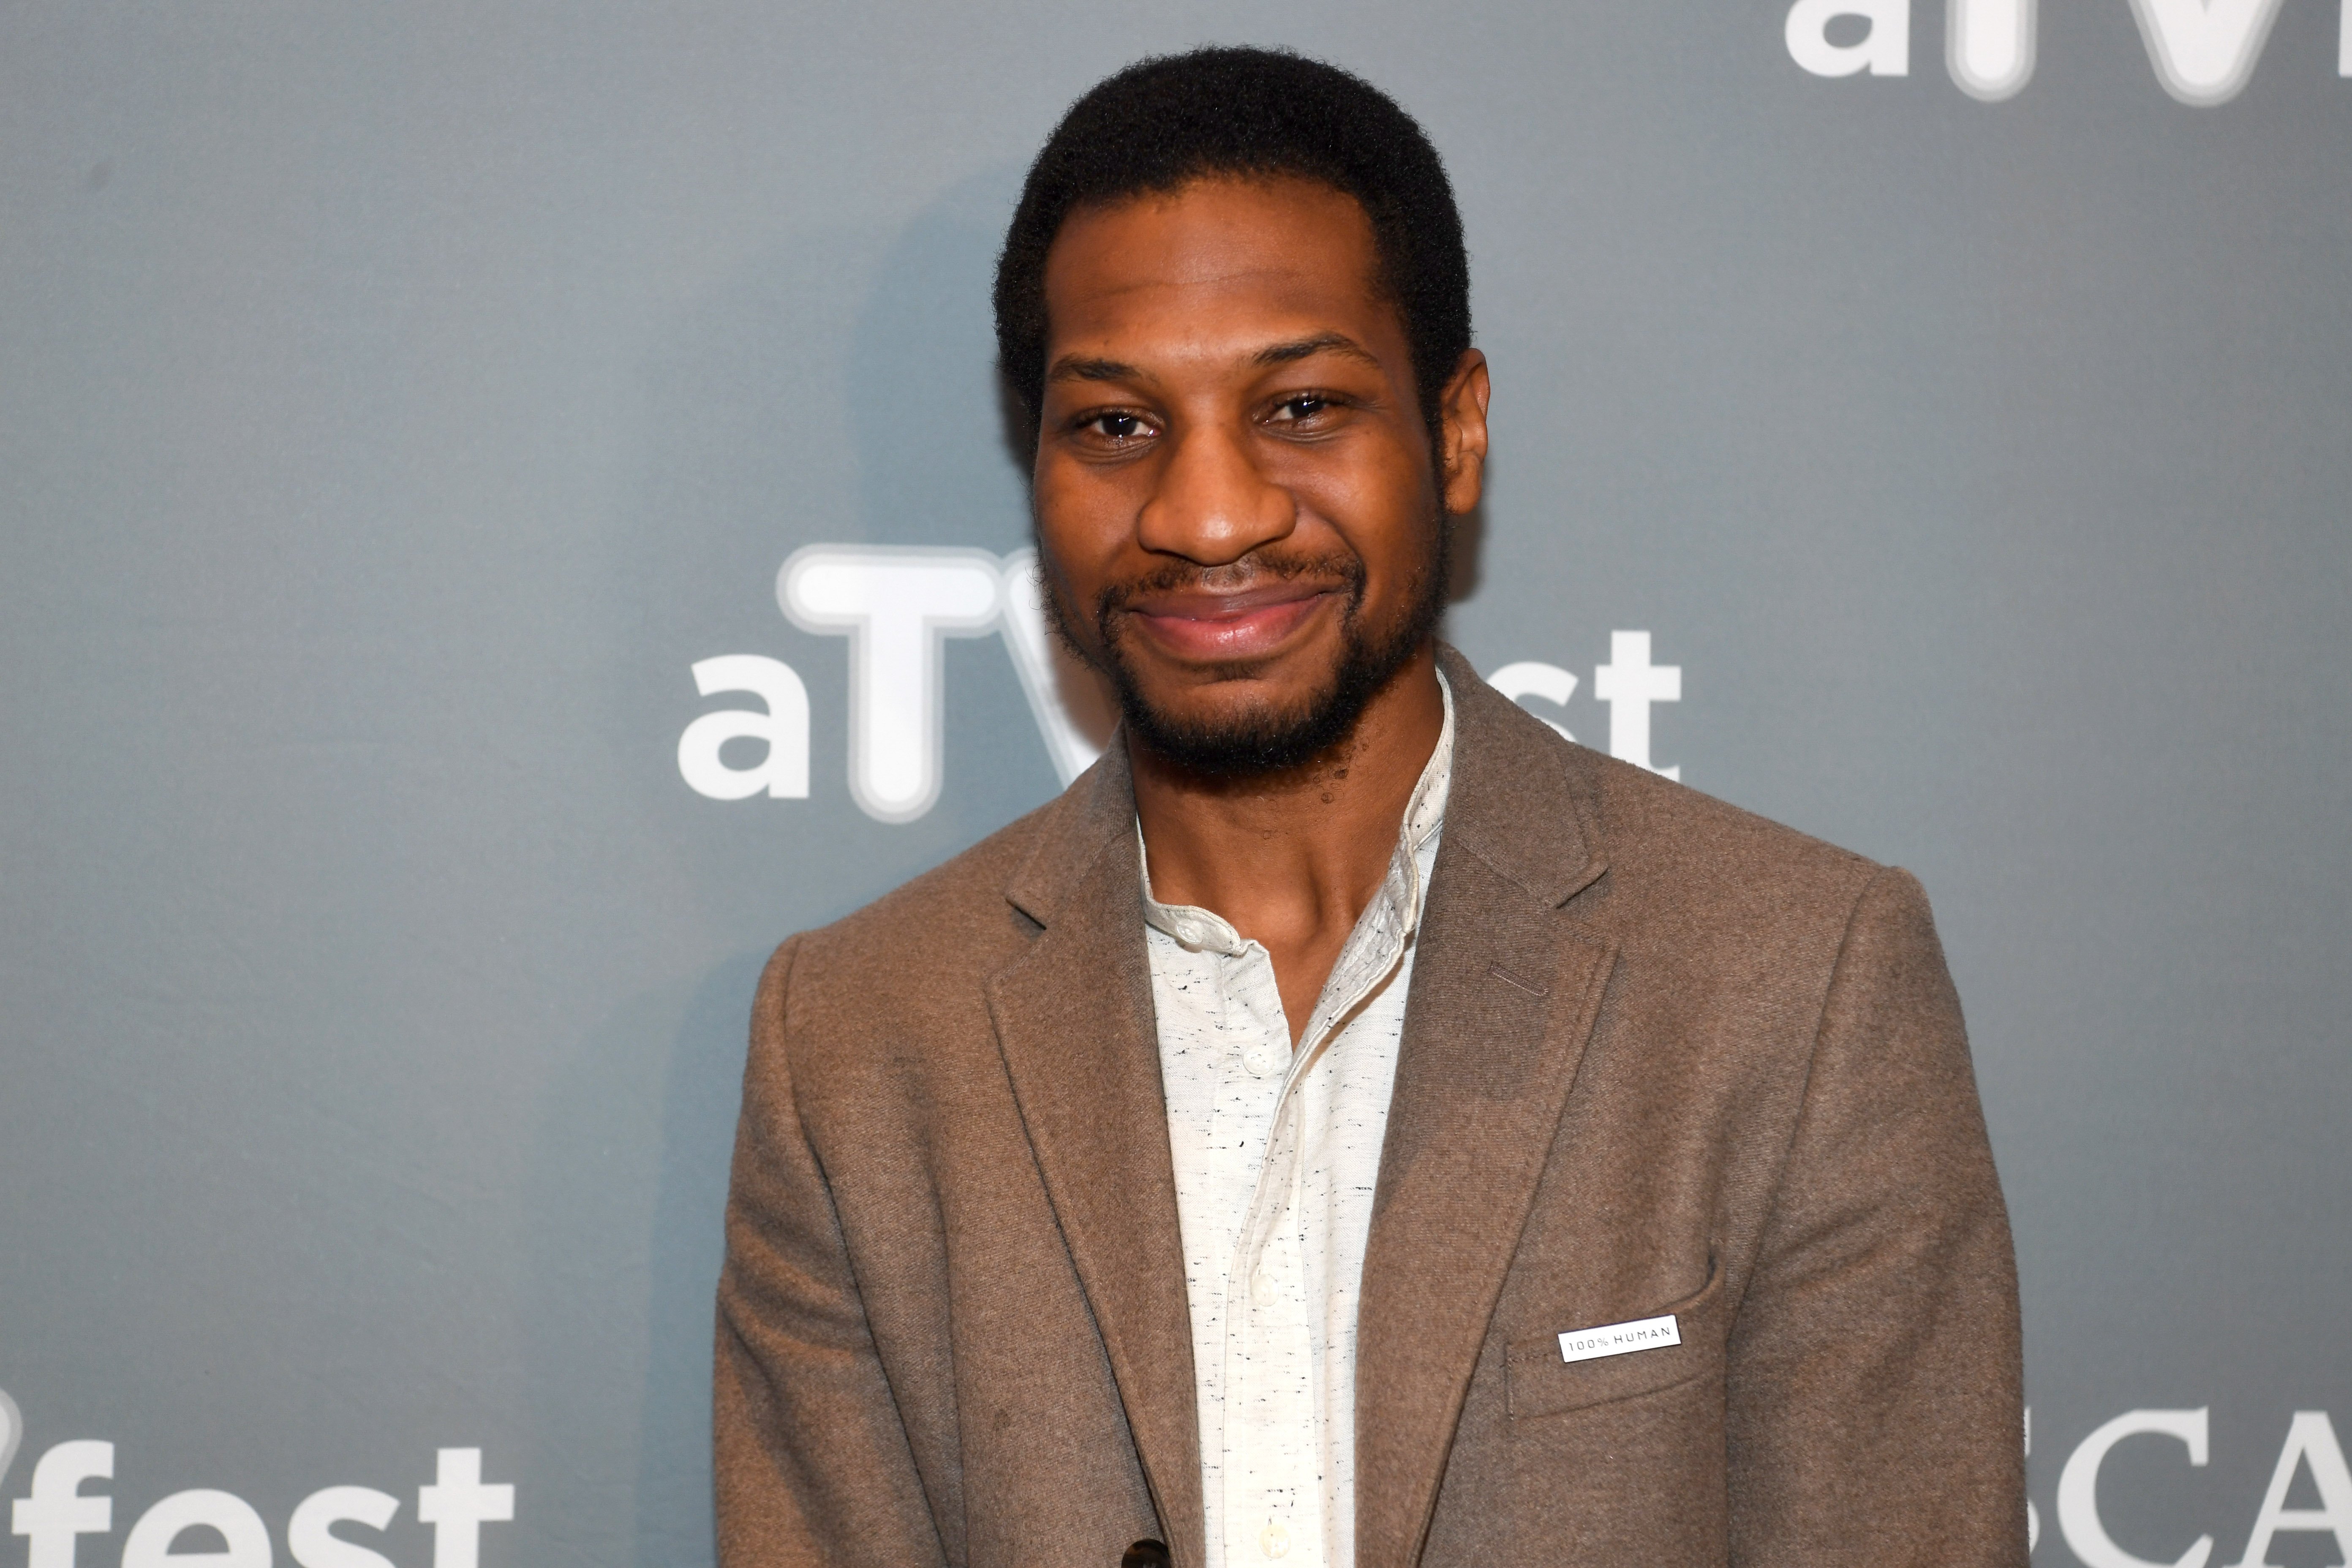  Jonathan Majors attend a press junket for 'When We Rise' during the 5th Annual aTVfest, at Four Seasons Hotel on, February 3, 2017, in Atlanta, Georgia. | Source: Getty Images